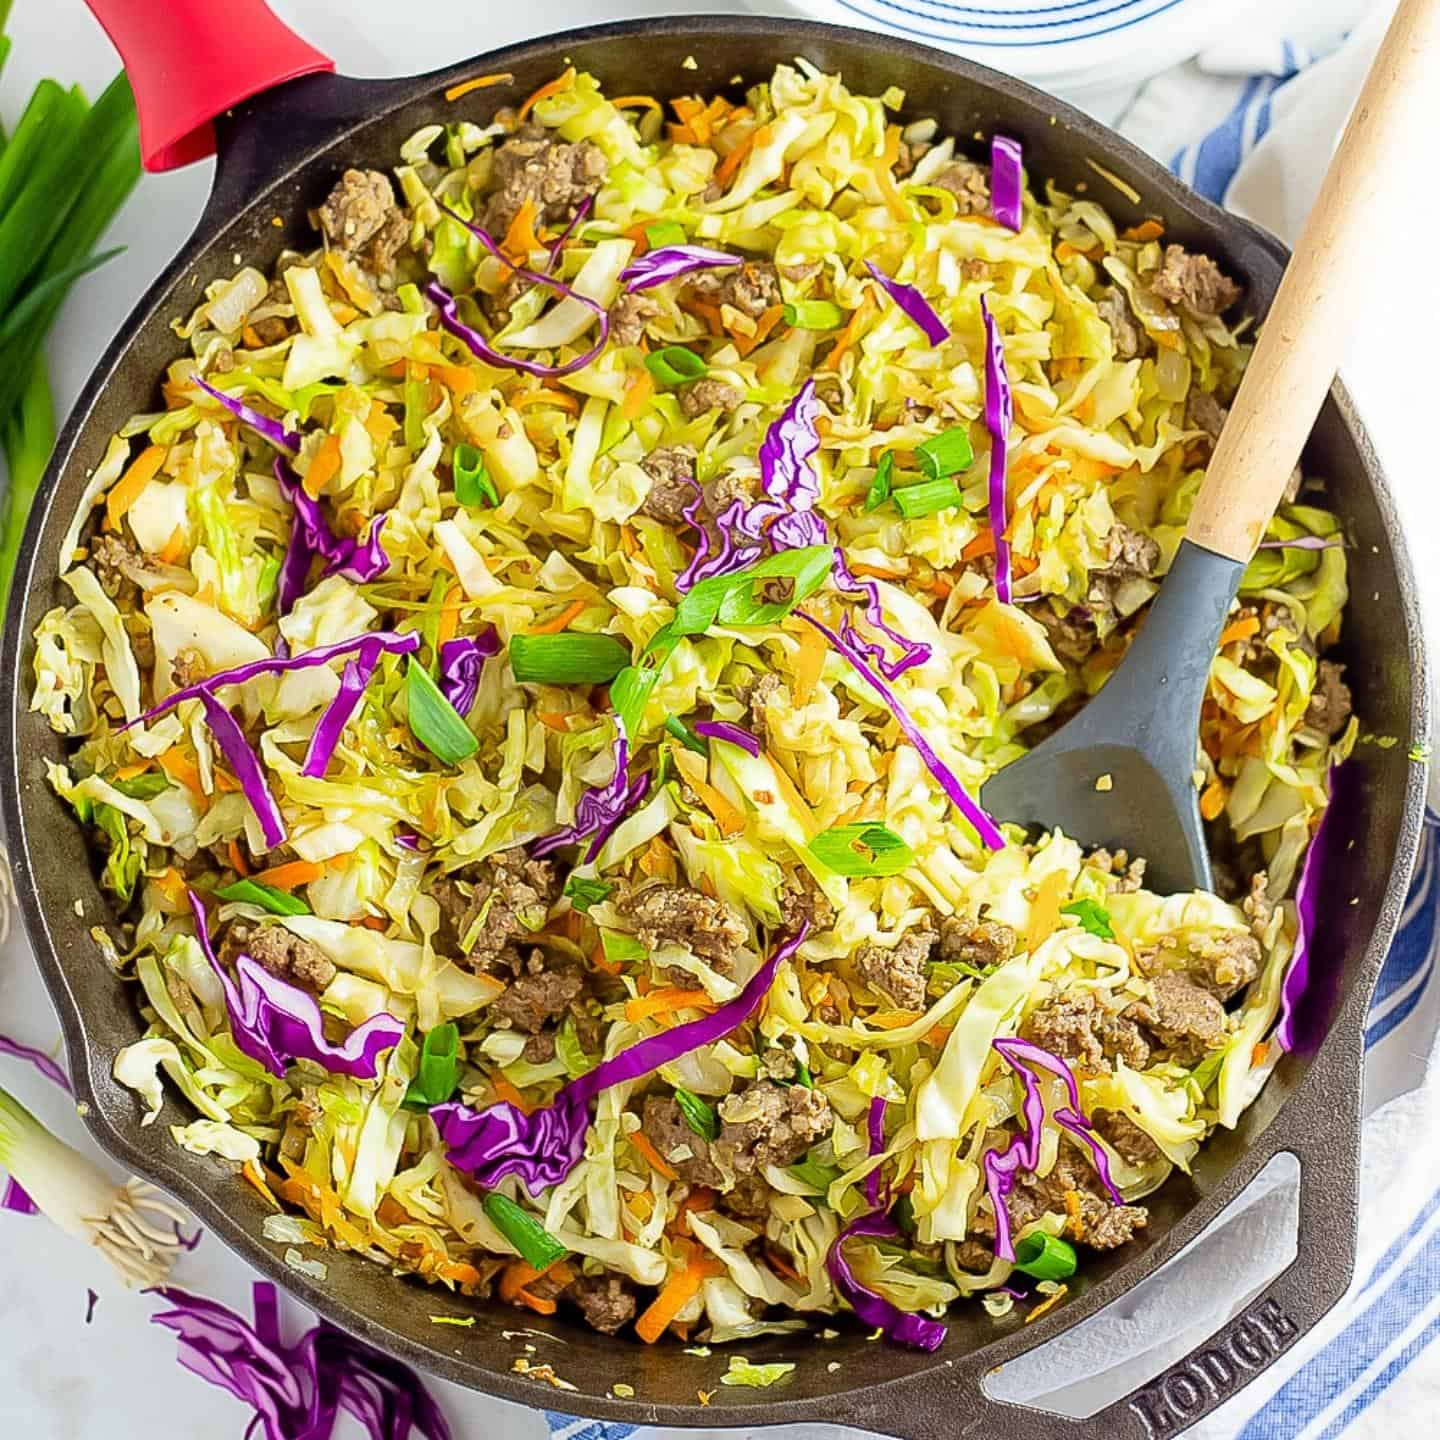 25 Easy Ground Beef Recipes with Few Ingredients - 730 Sage Street